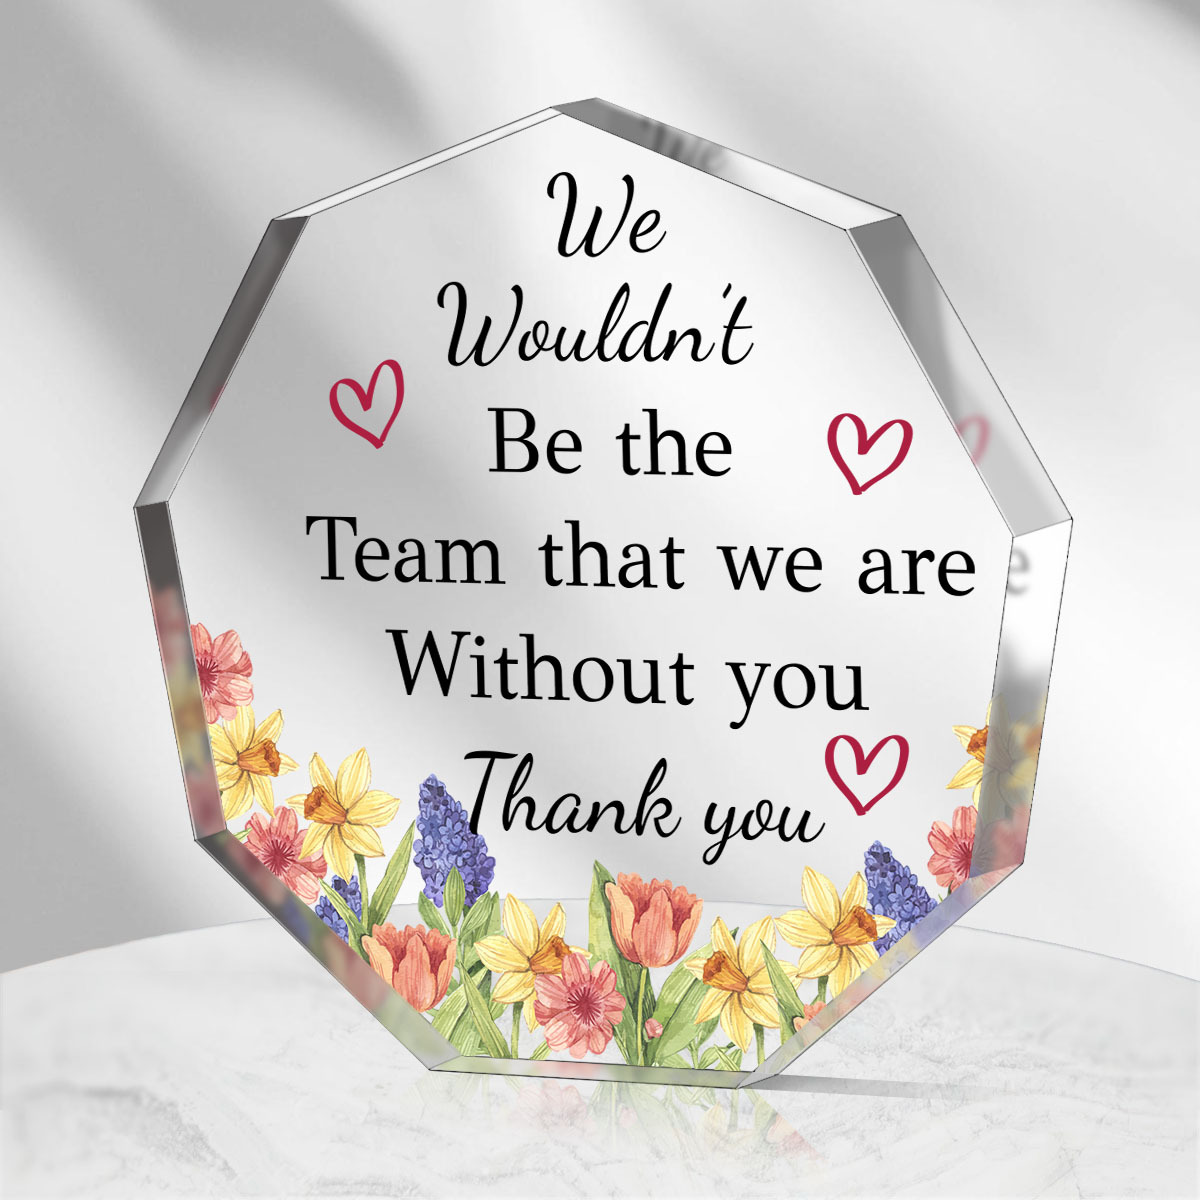 Thank You Gifts for Women - Valentines Day Gifts for Women, Teacher,  Coworker, Boss - Boss Lady Gifts for Women, Coworker Gifts, Office Gifts,  Boss